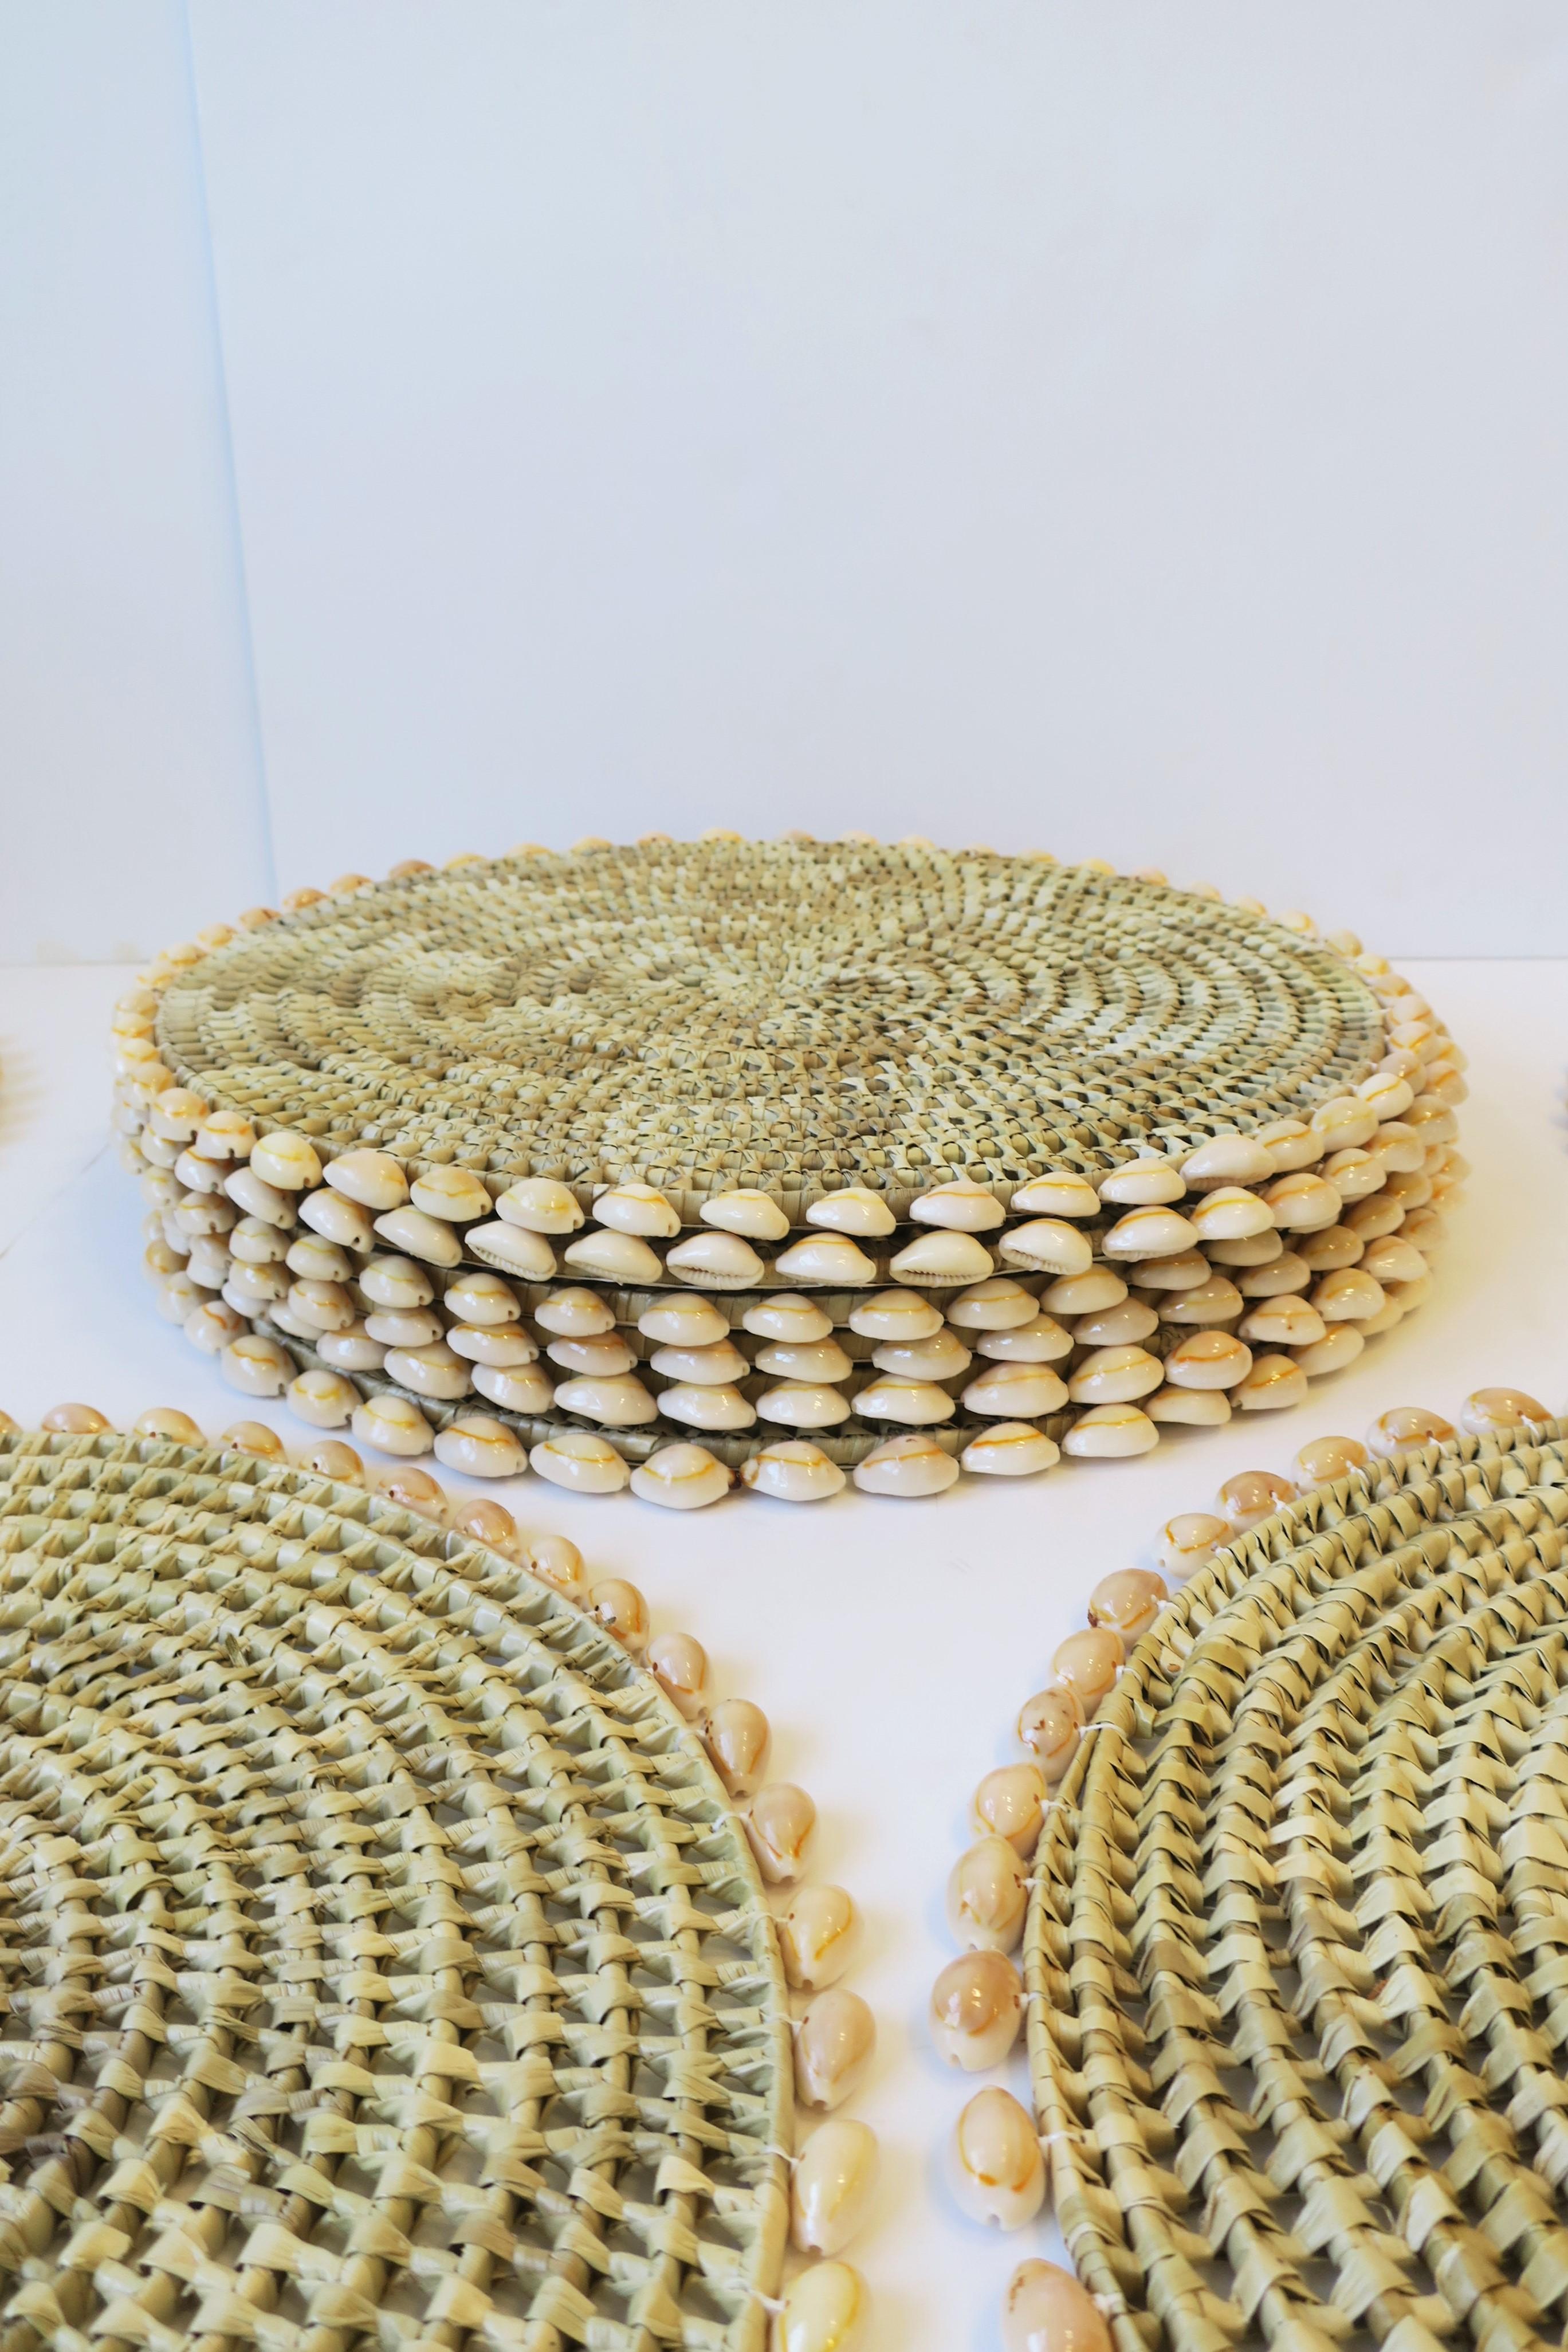 Seashell and Wicker Placemats or Dinner Plate Chargers, Set of 12 7